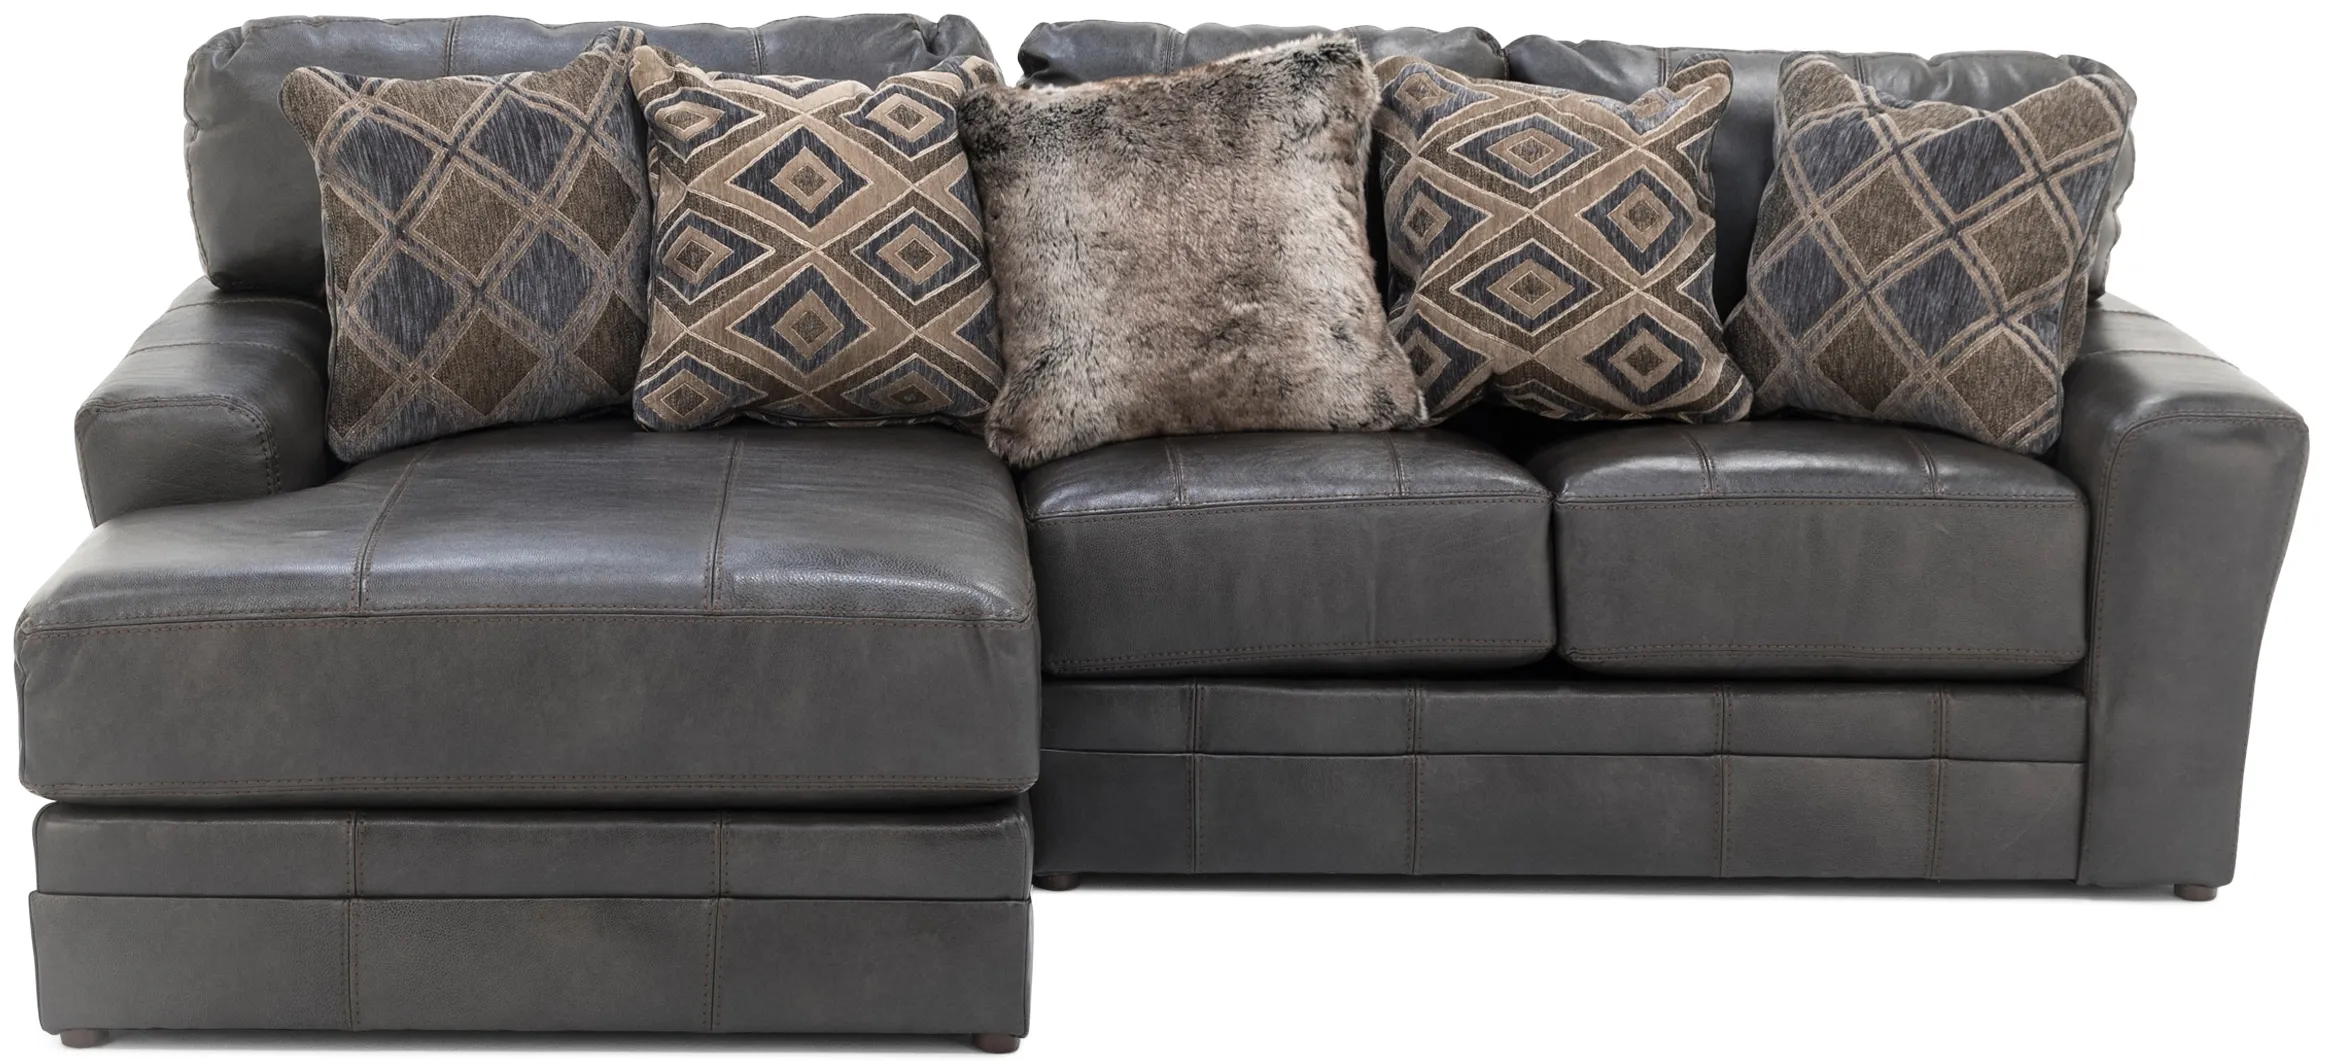 Camden 2-Pc. Leather Sectional with Left Arm Facing Chaise in Steel